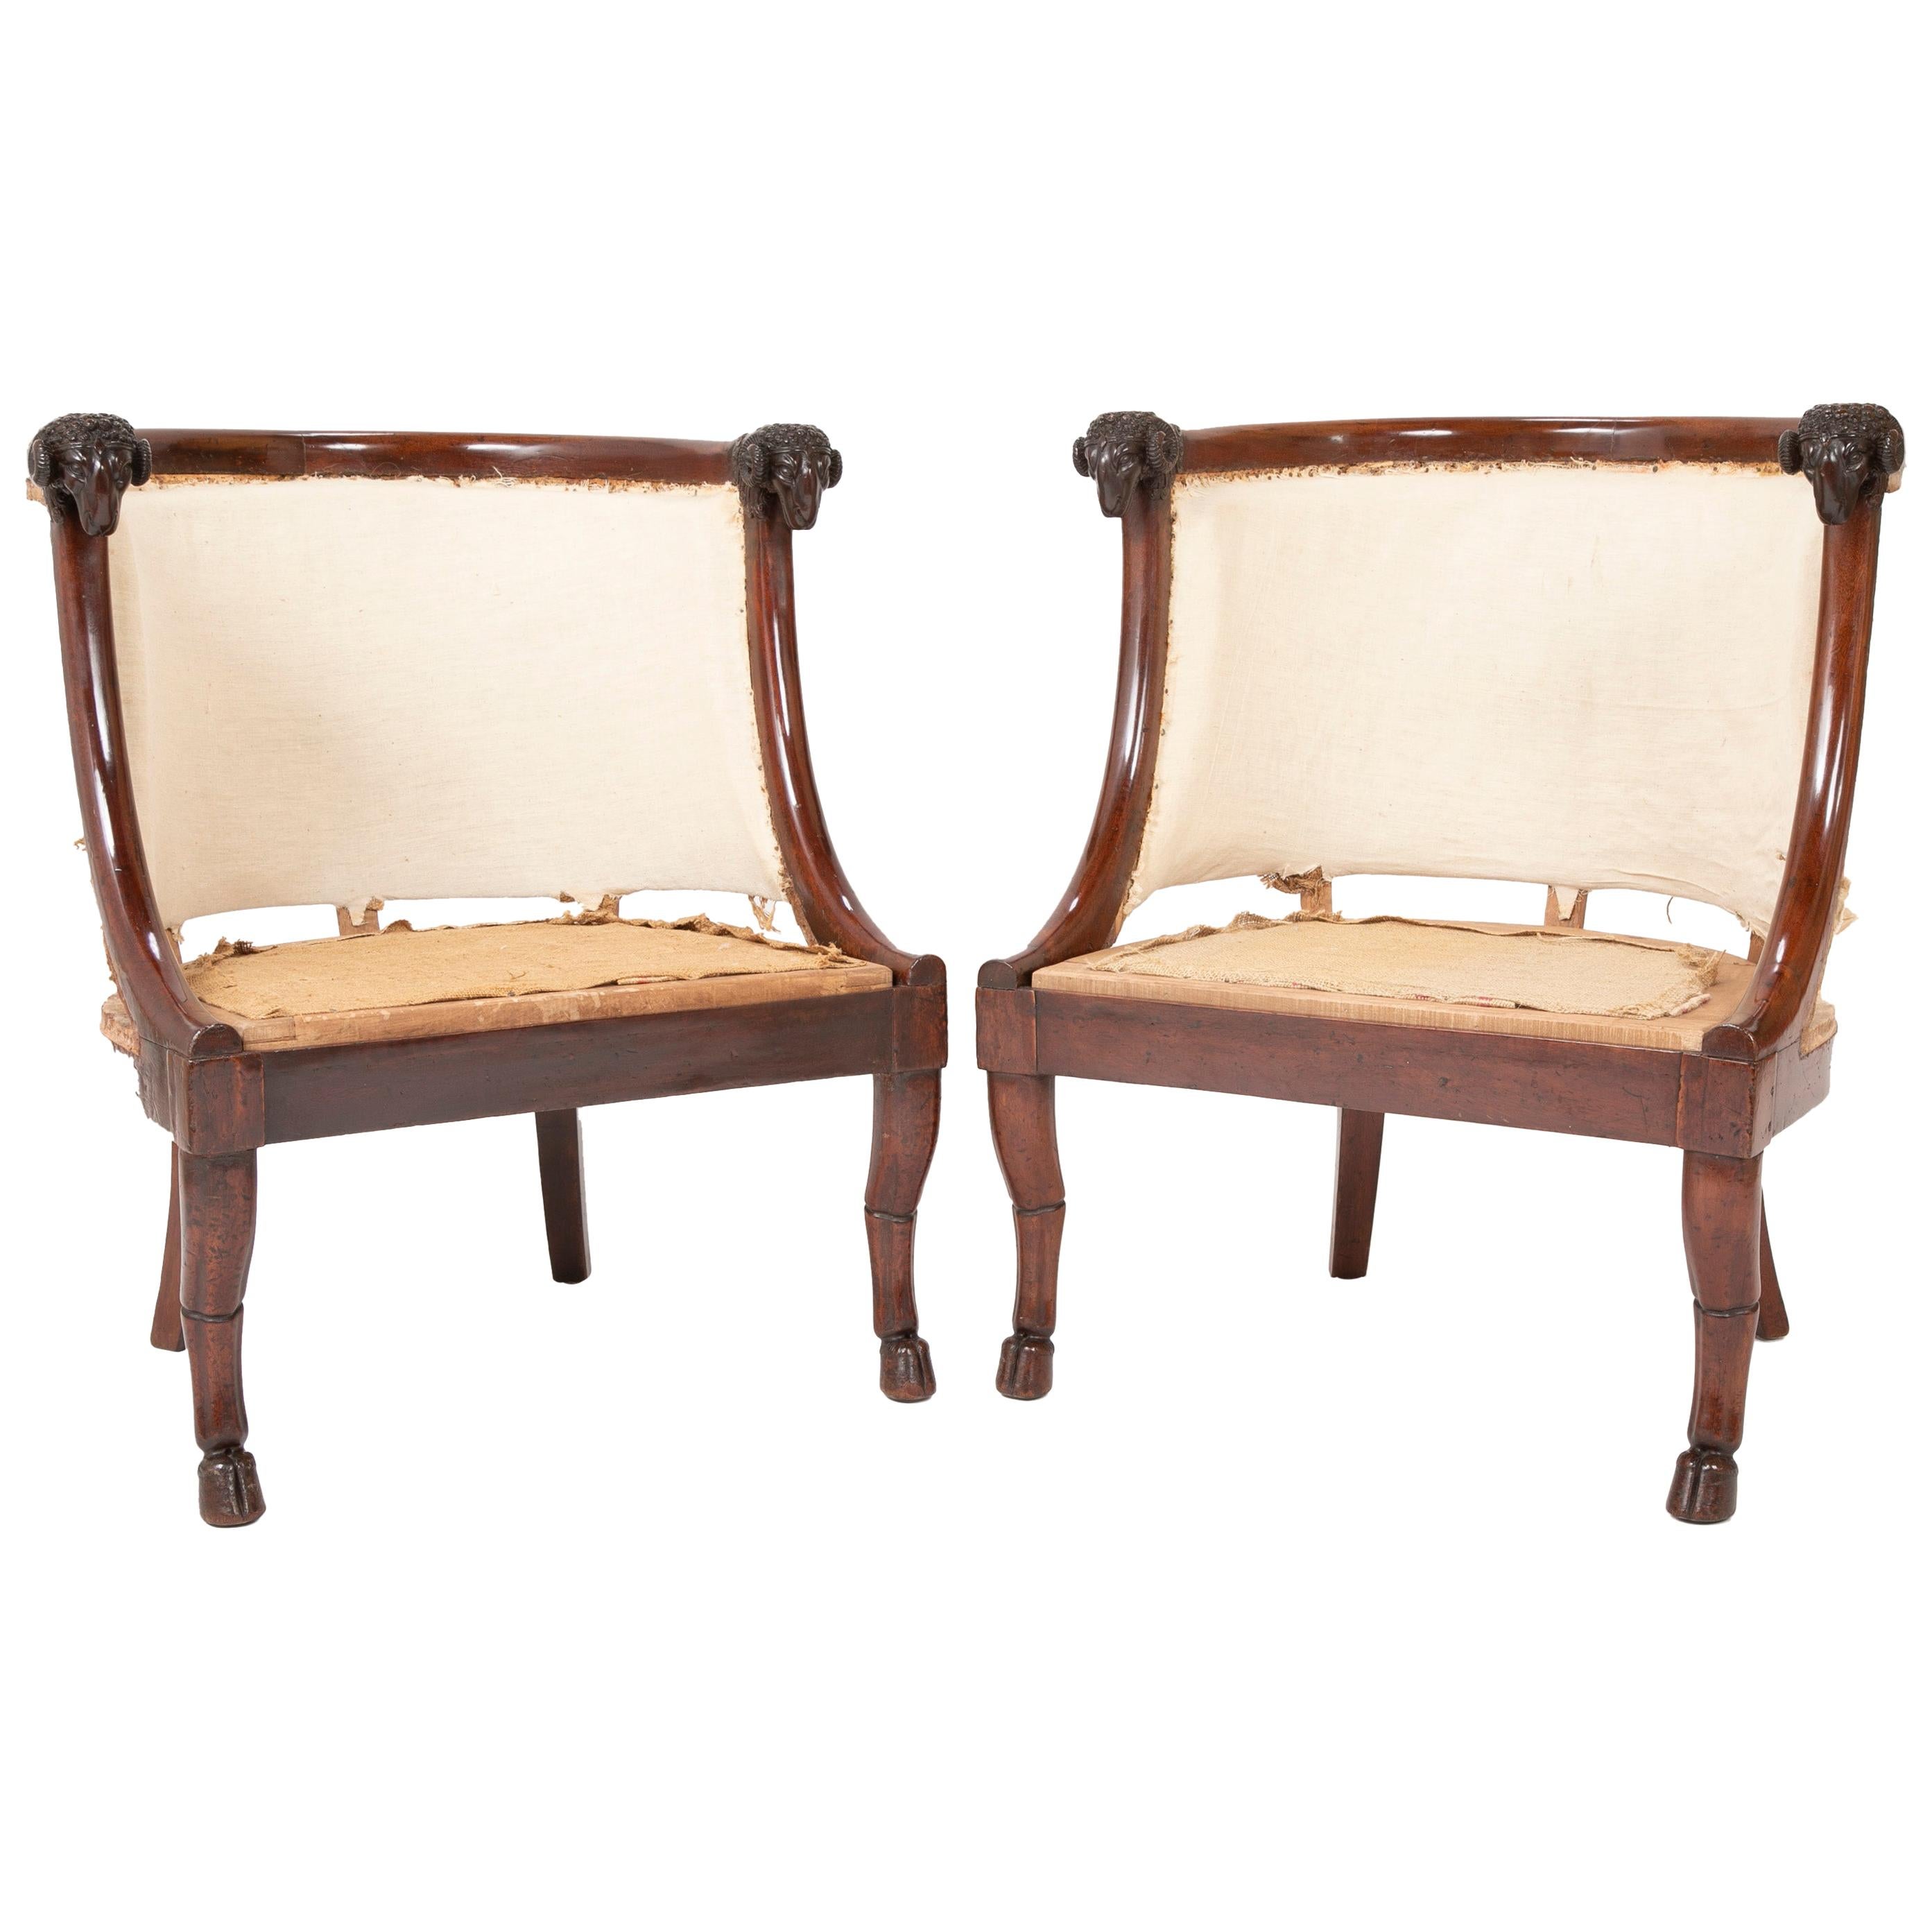 Pair of French Empire Mahogany Armchairs Attributed to Jacob Desmalter For Sale